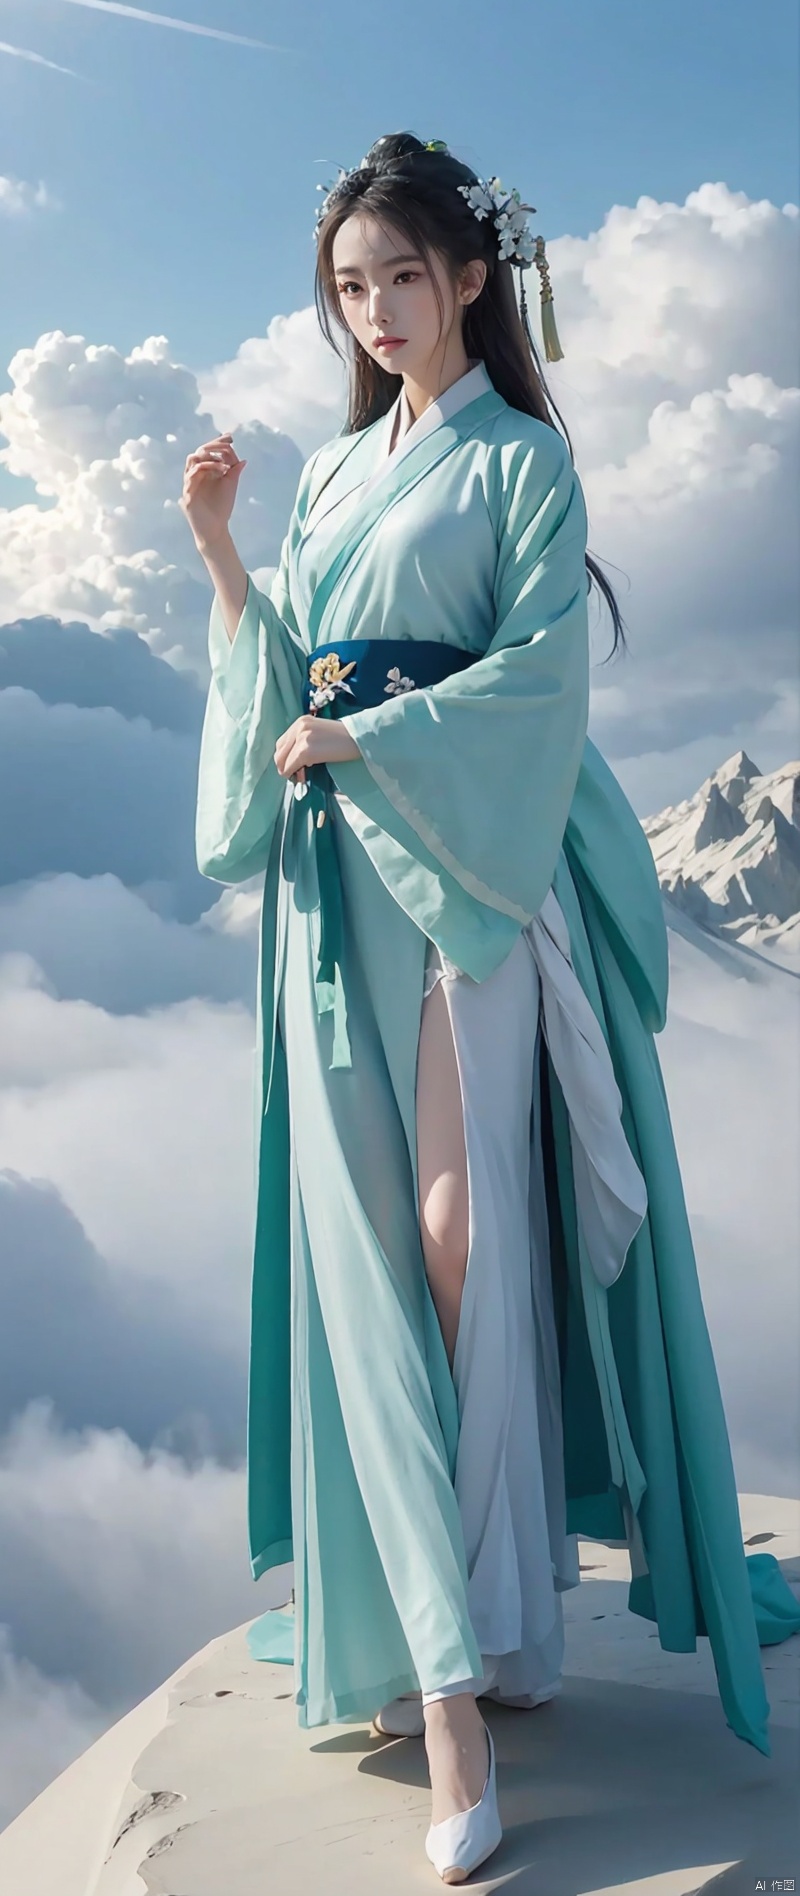 masterpiece, best quality, 32k uhd, Fairy in Cloudsabove clouds
green Hanfufull bodyPanorama
